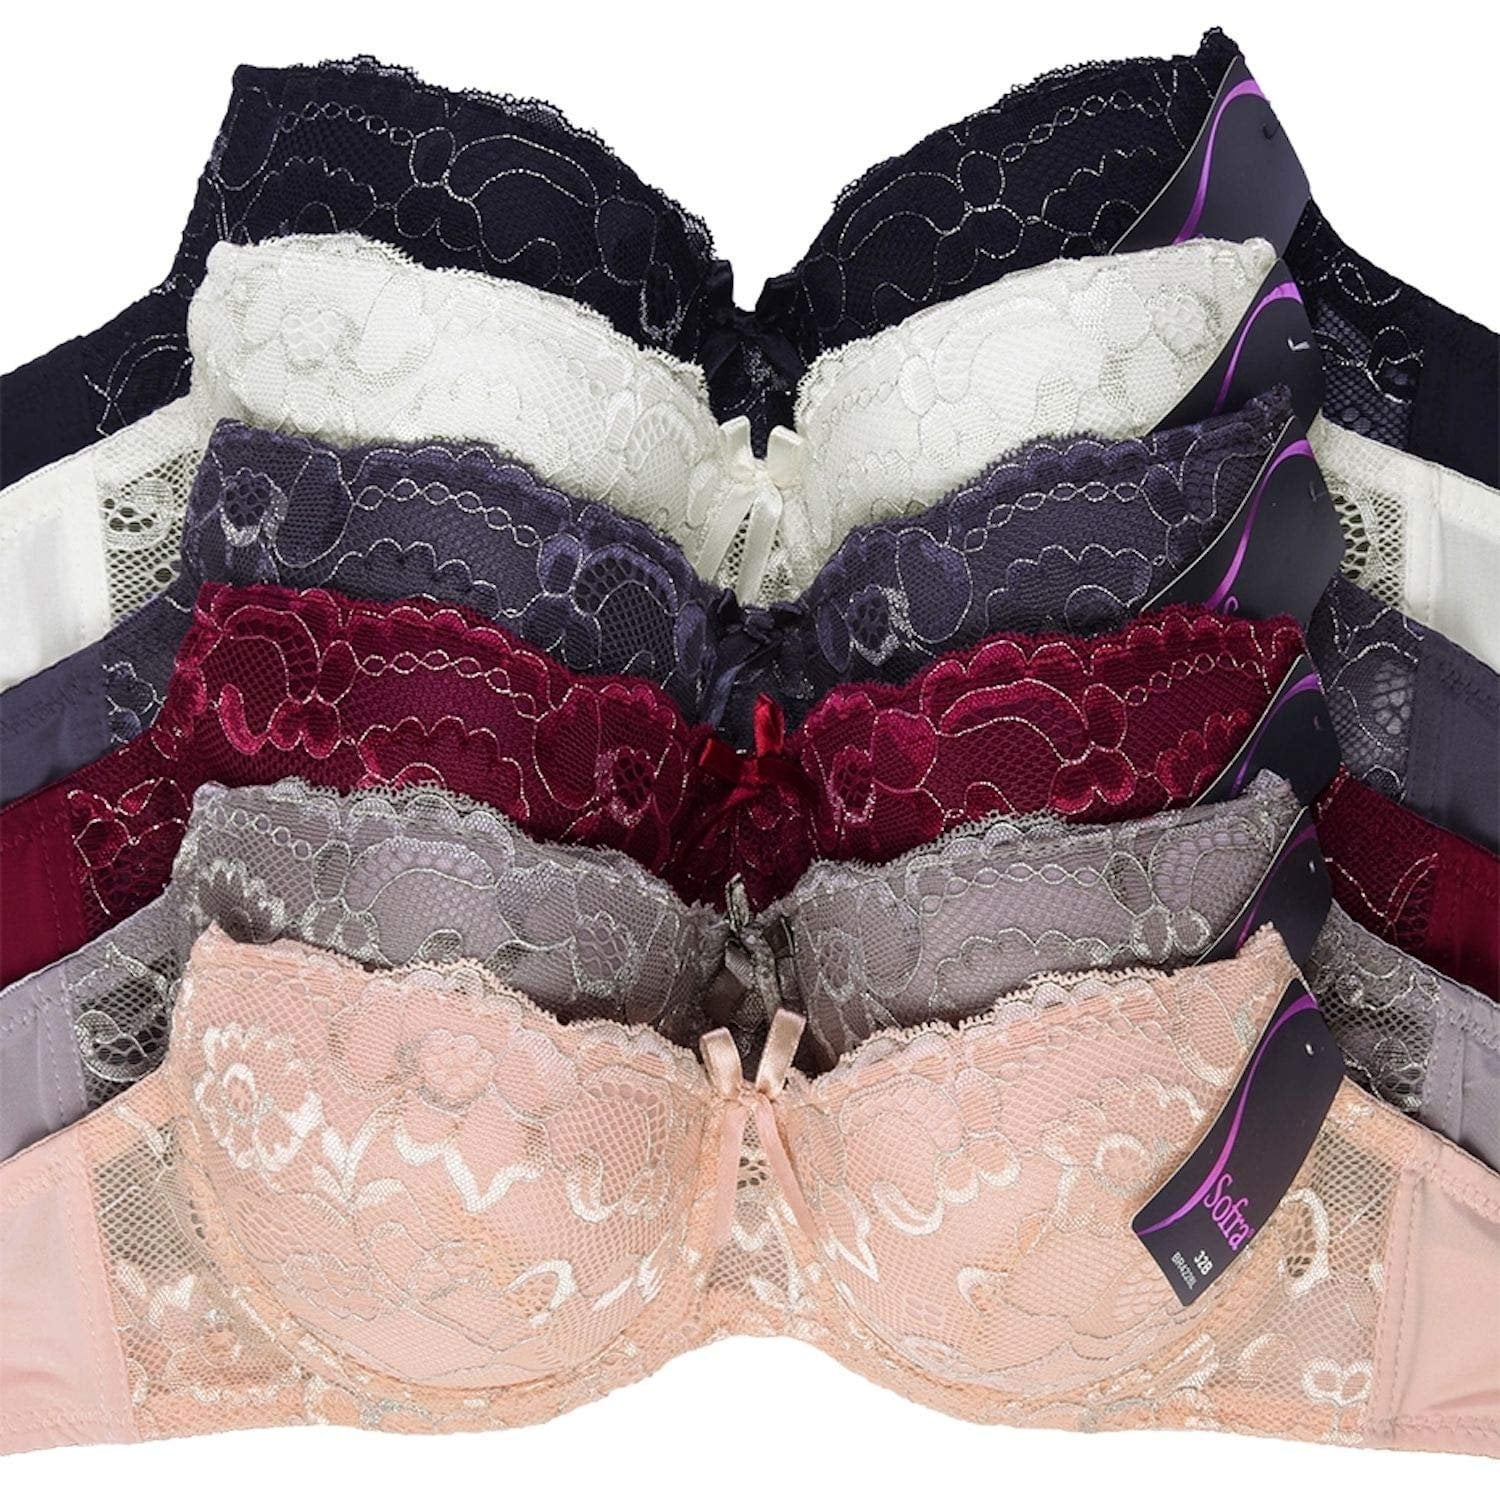 Mamia Women's Basic Plain Lace Bras Pack of 6 - Various Styles #301, 38C 